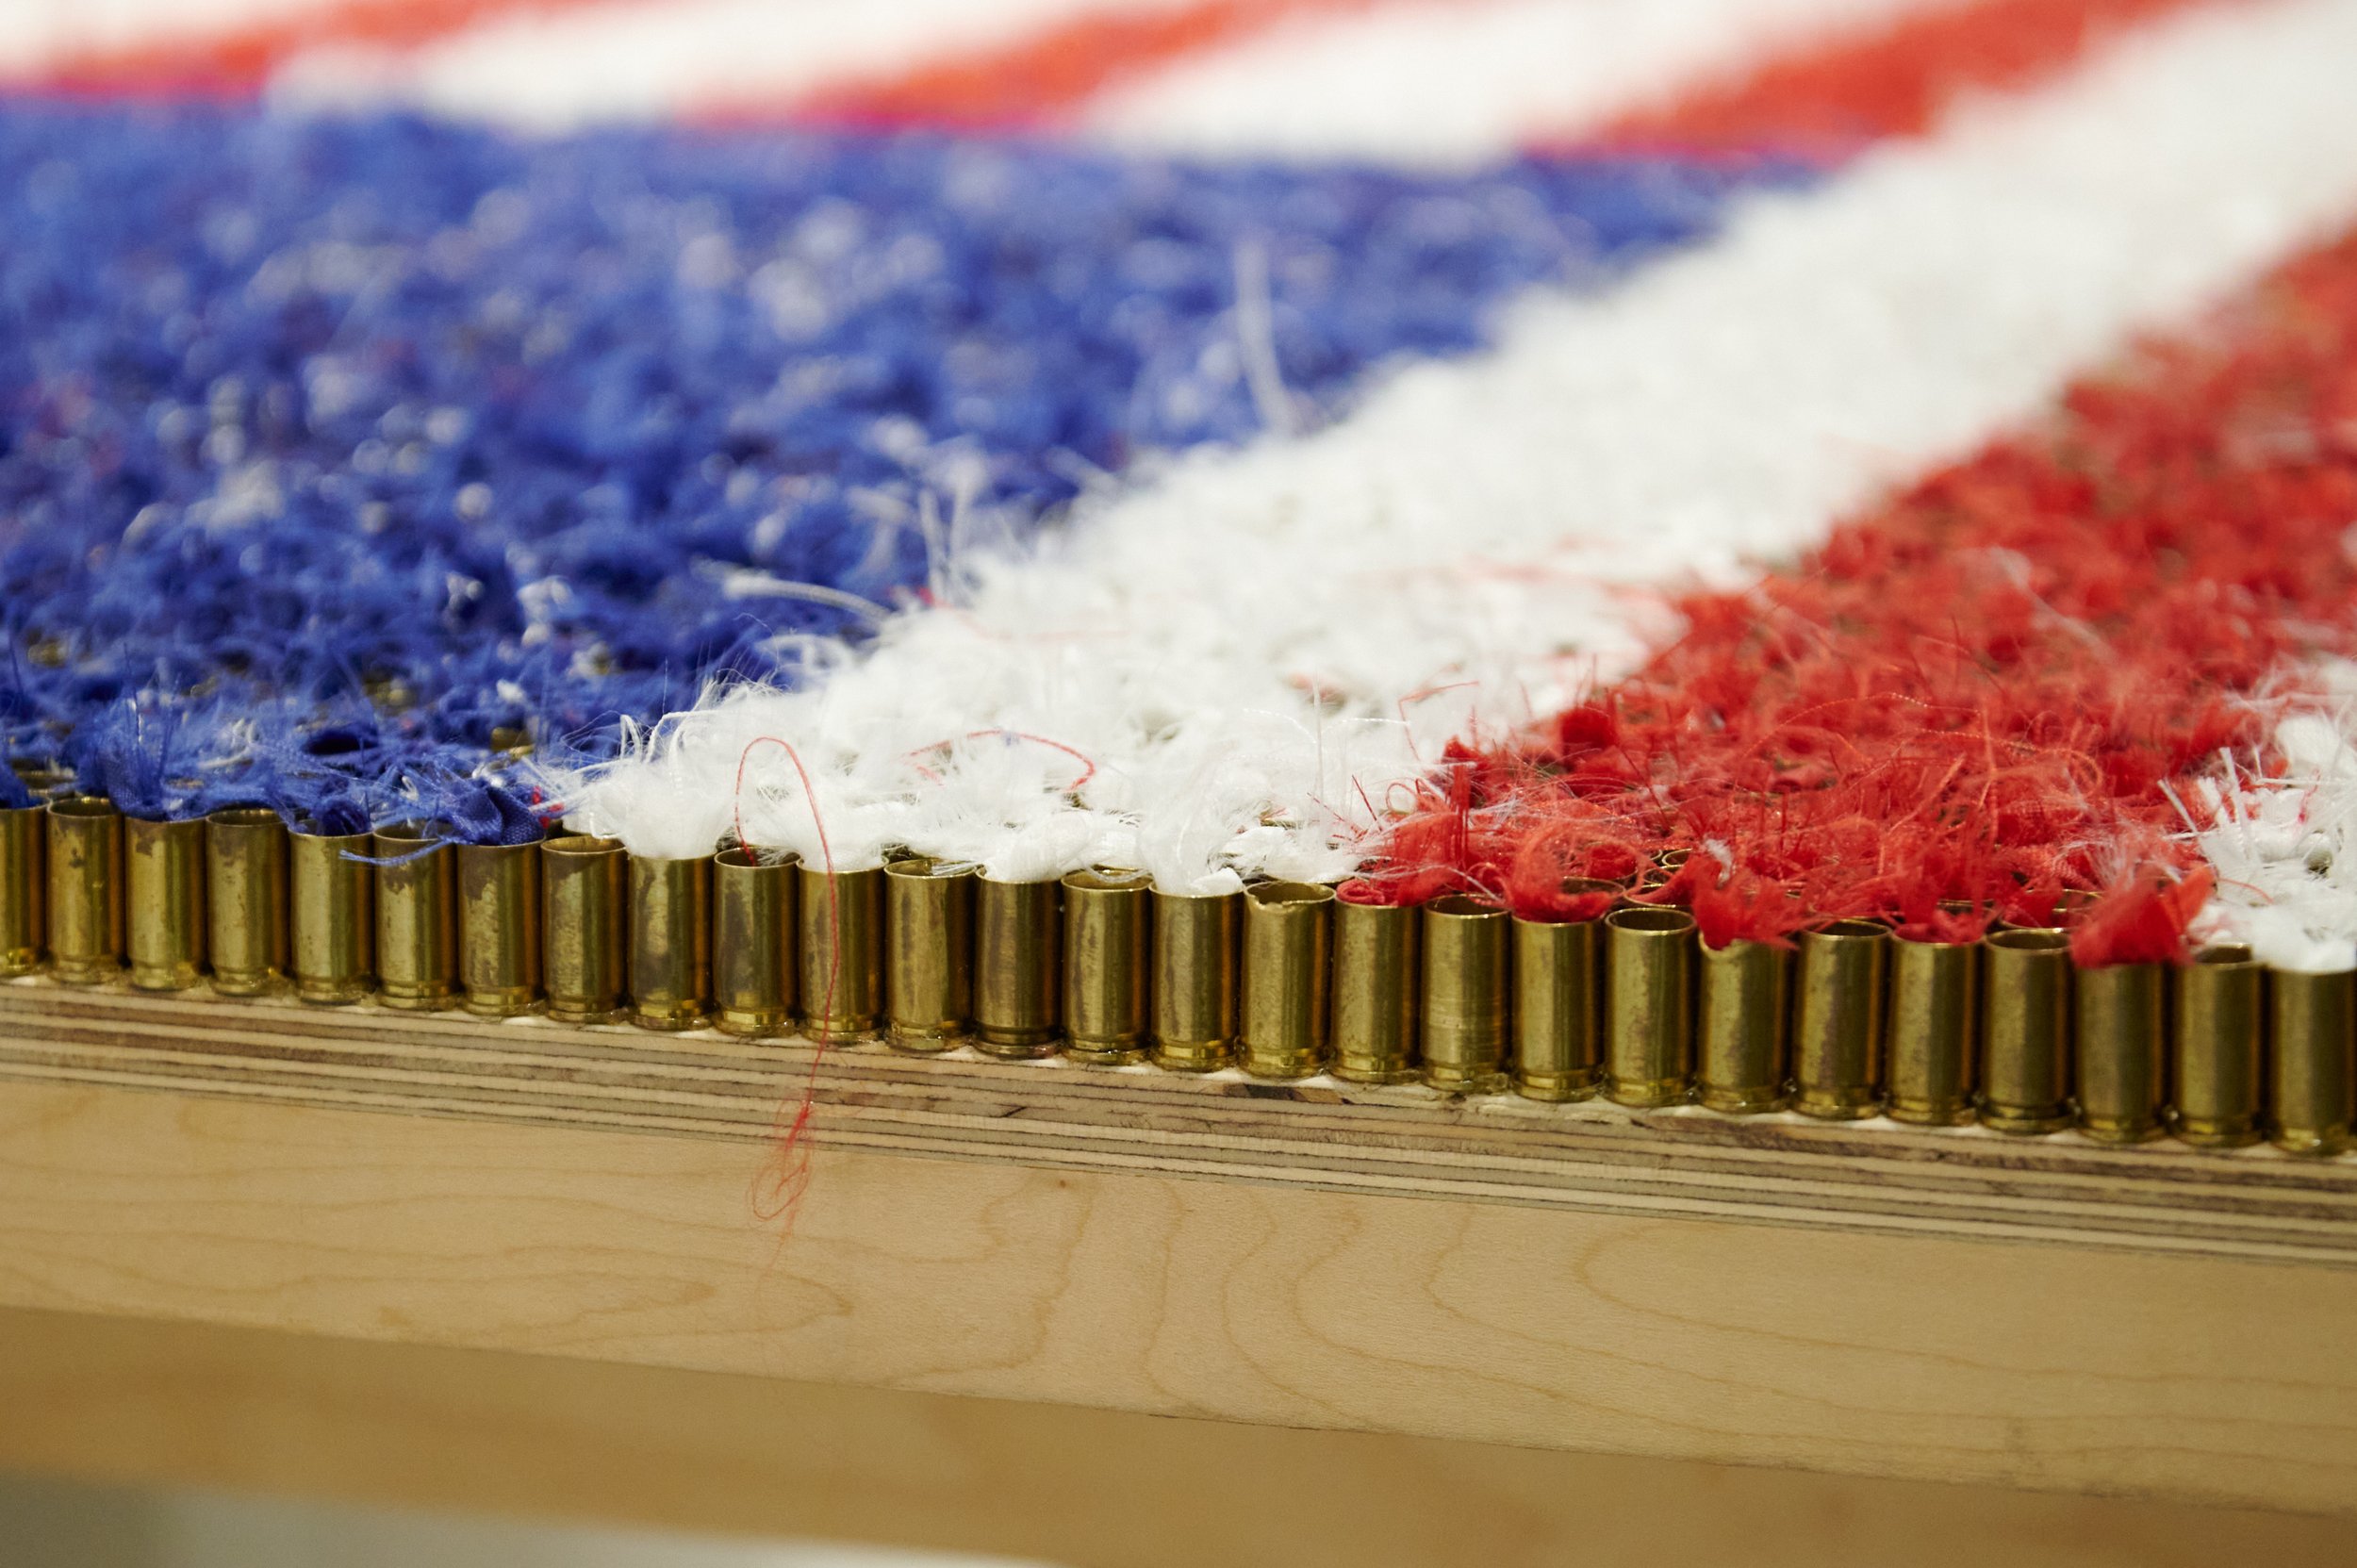  Artist Sol Hill's work, "Caseload," is comprised of 20,835 bullet casings, signifying the number of gun killings in the USA in 2021, excluding suicide, and are stuffed with shredded American flags. On display at The Other Art Fair on Thursday, Sept.